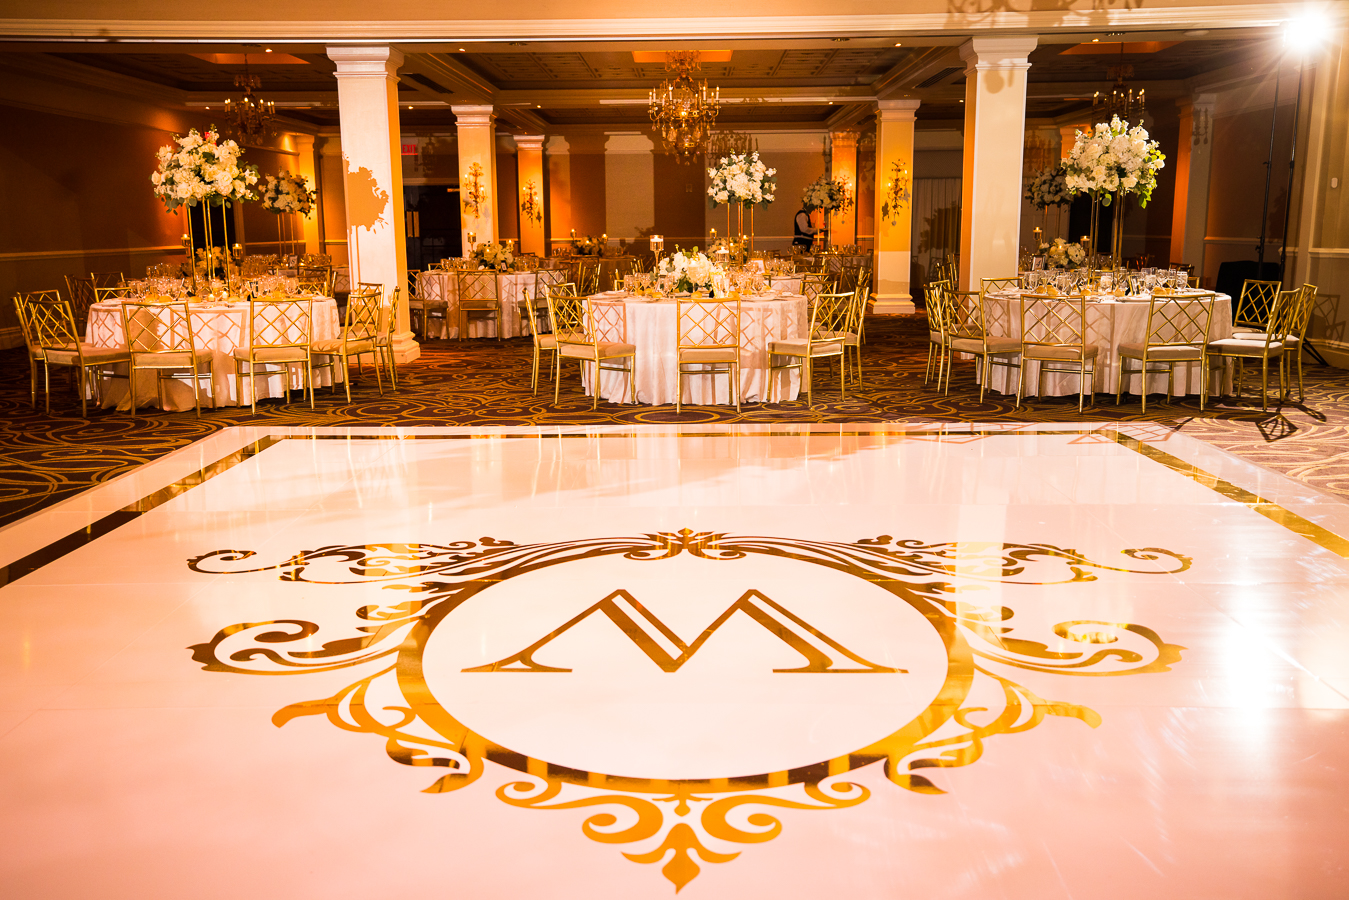 the palace at somerset park wedding photographer, lisa rhinehart, captures this black and gold wedding theme decor and a picture of the gold monogram that was placed on the dance floor during this nj wedding